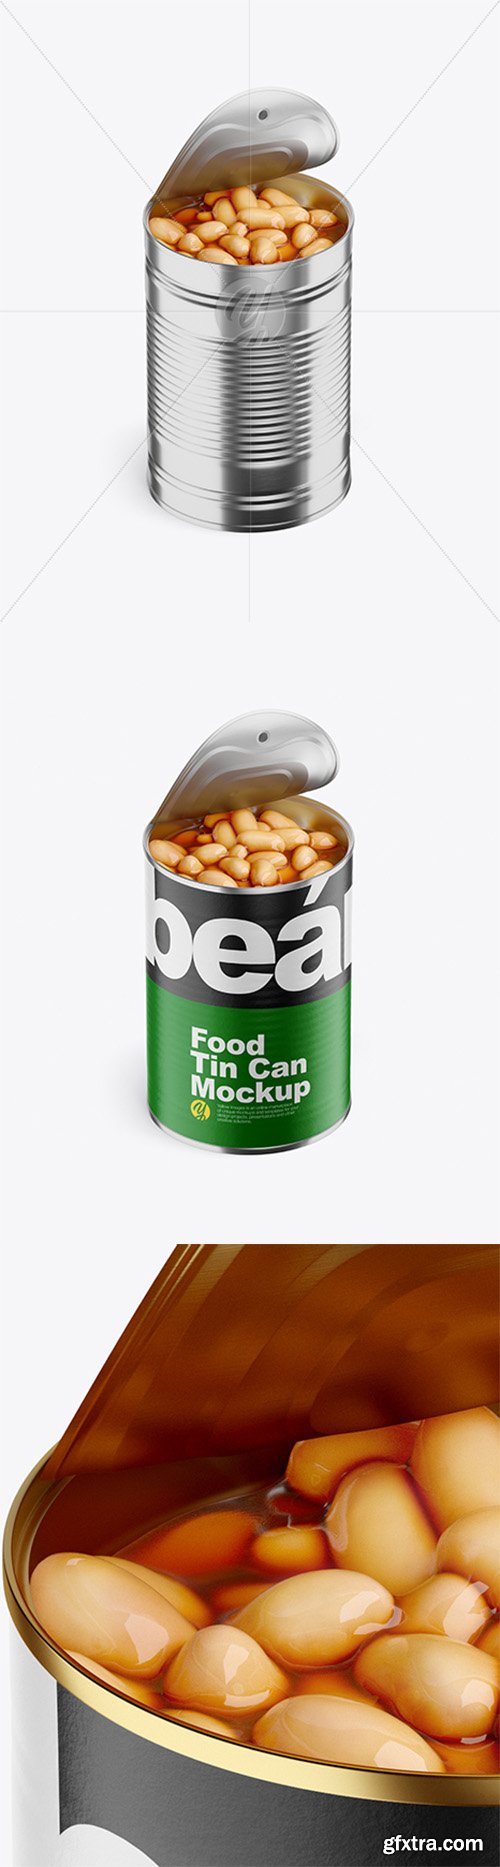 Food Can w/ White Beans Mockup 36420